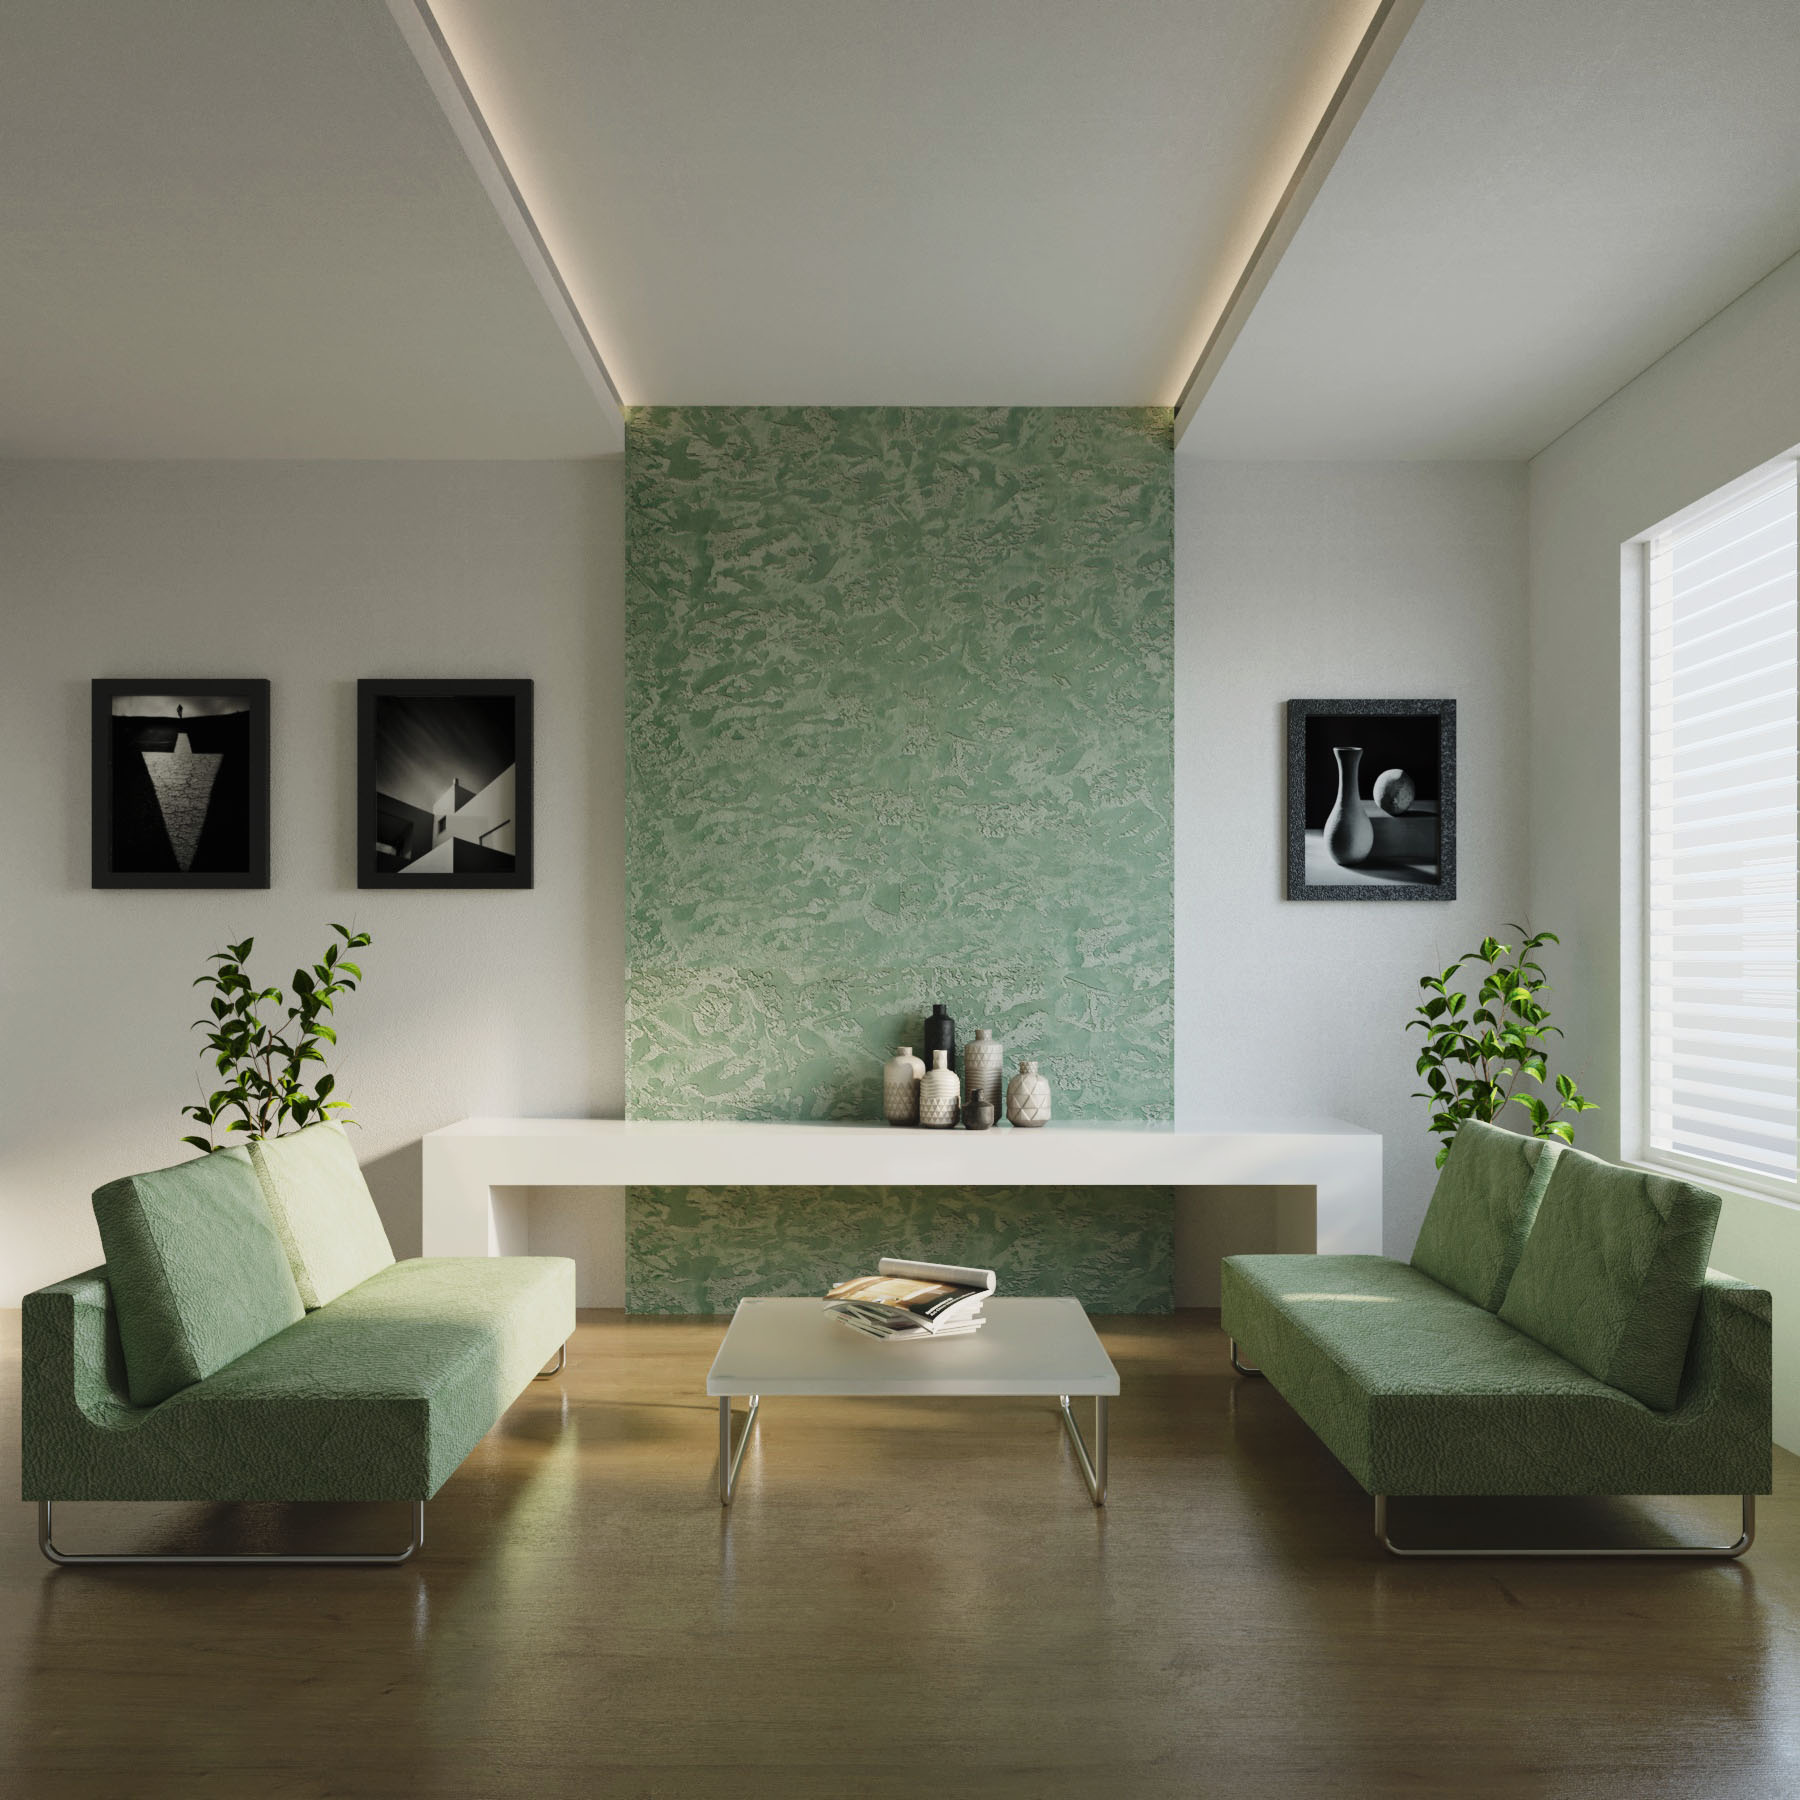 1 Latest Color Schemes with Fern Green And Moss Green Color tone